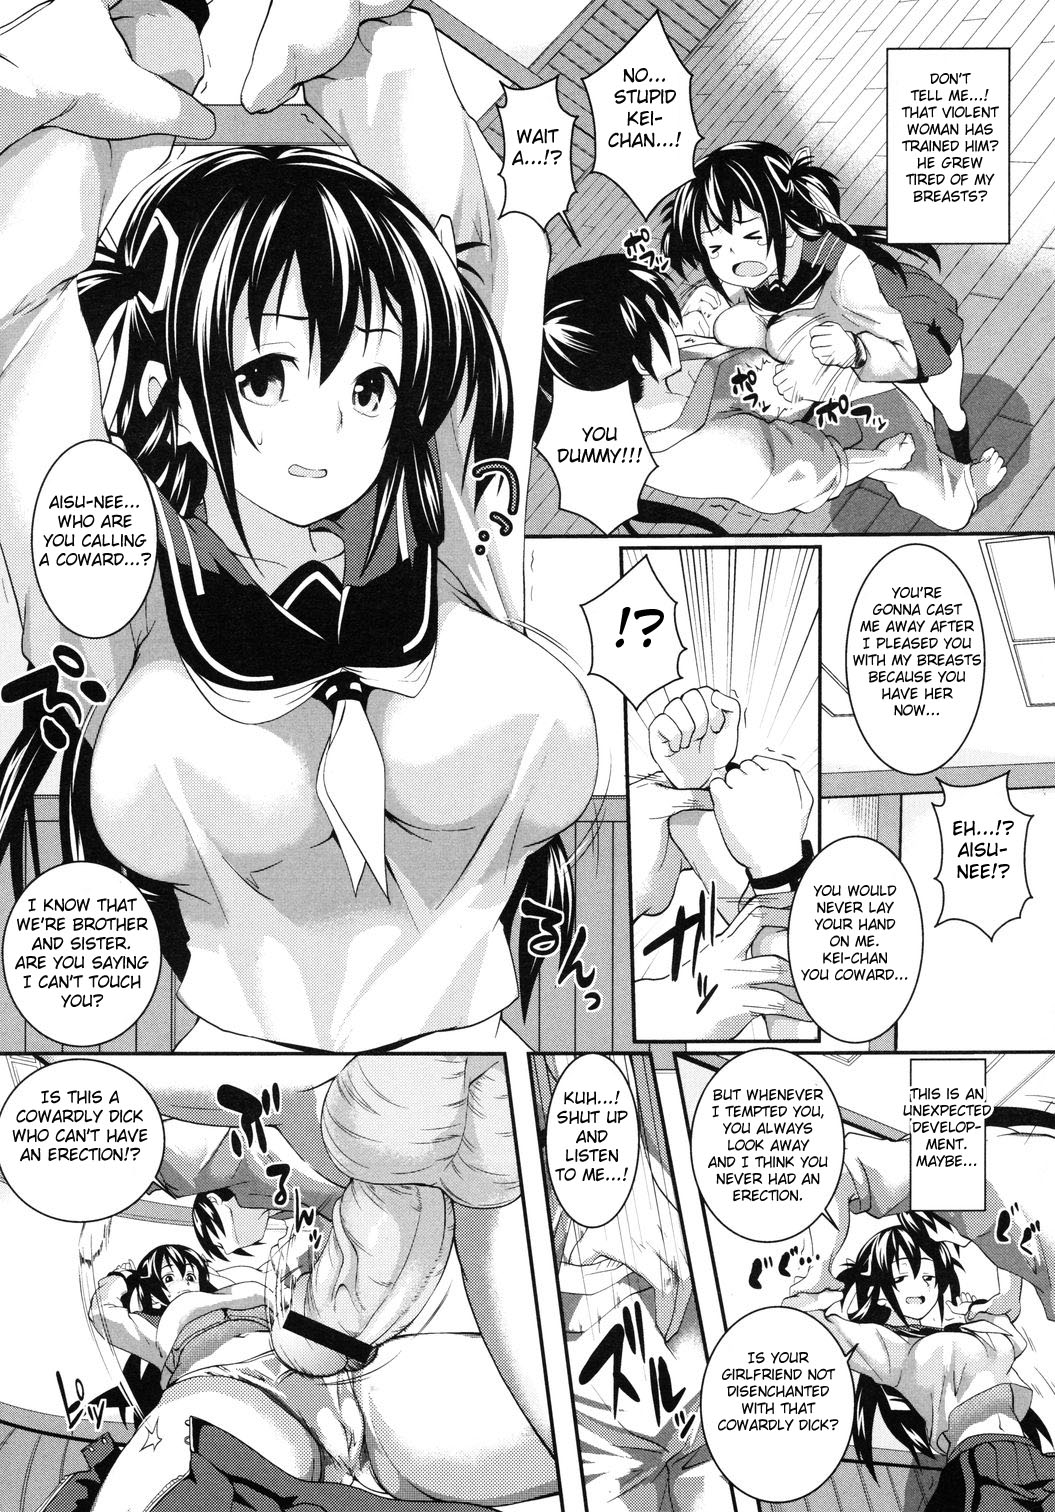 [soba] Tsukushite♪Amaete♪ | Hold Me, Fawn on Me Ch. 1-2 [English] {doujin-moe.us} page 8 full